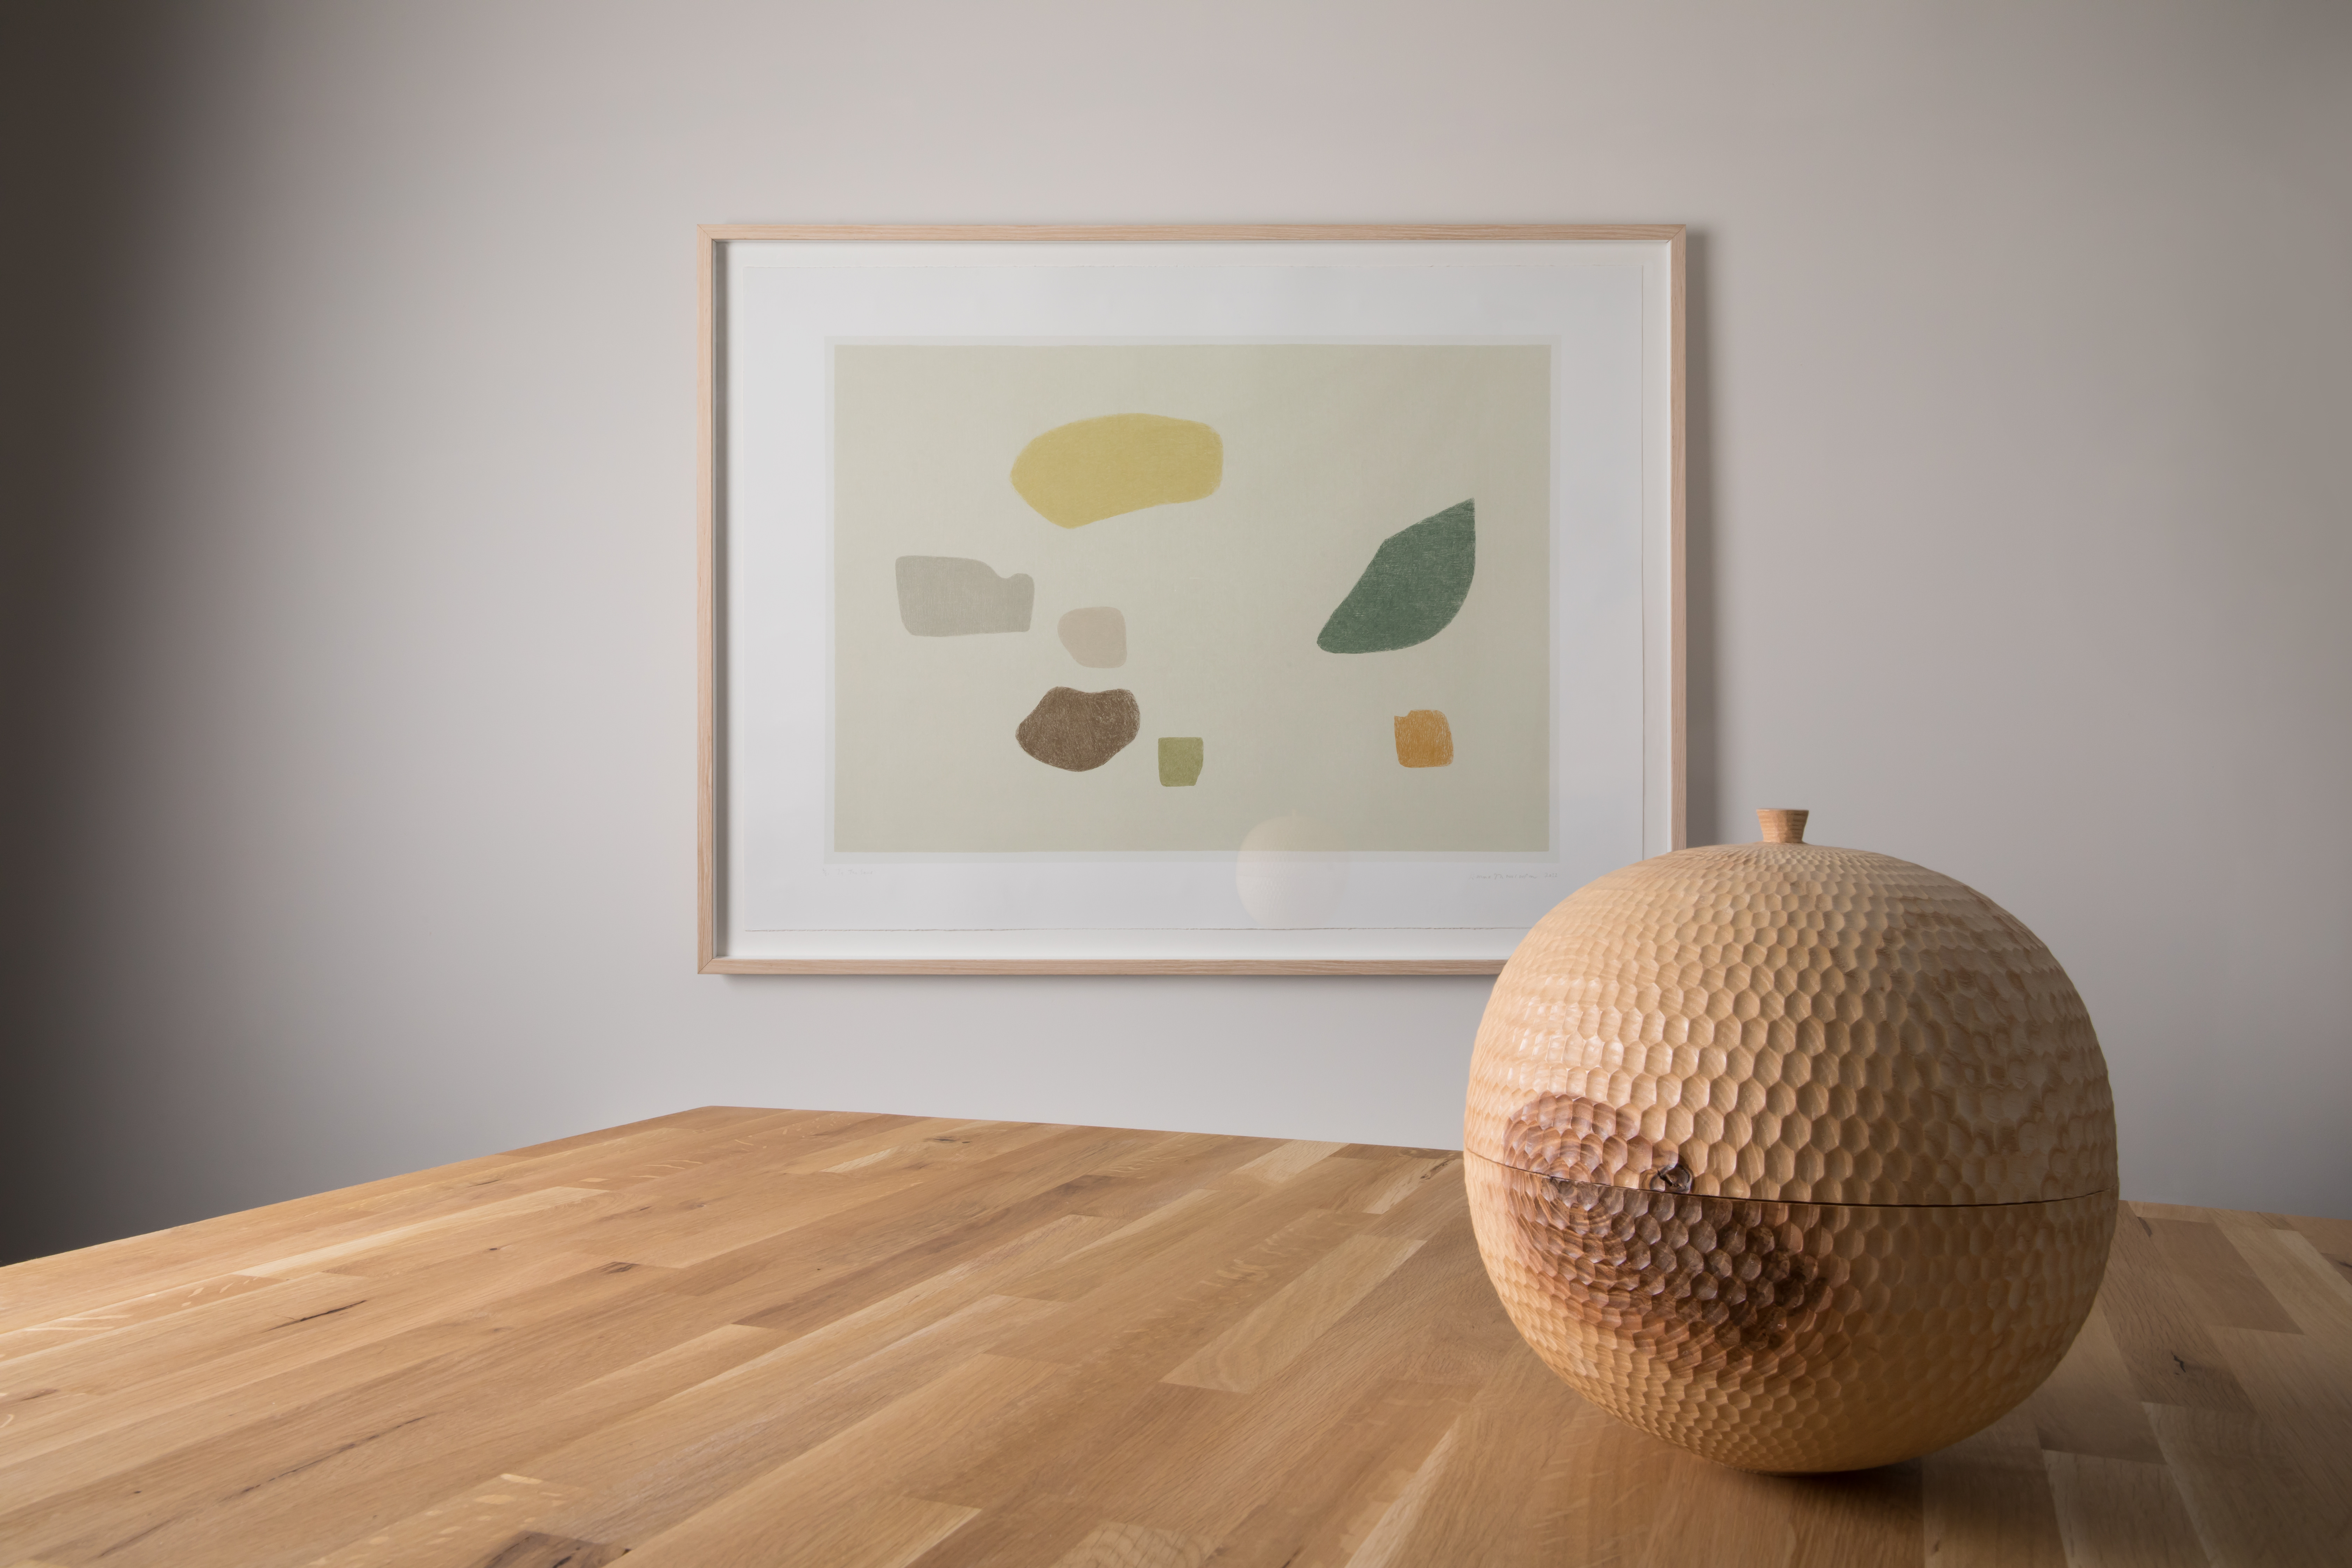 A framed print hung on a wall and a carved wooden vessel in the foreground.